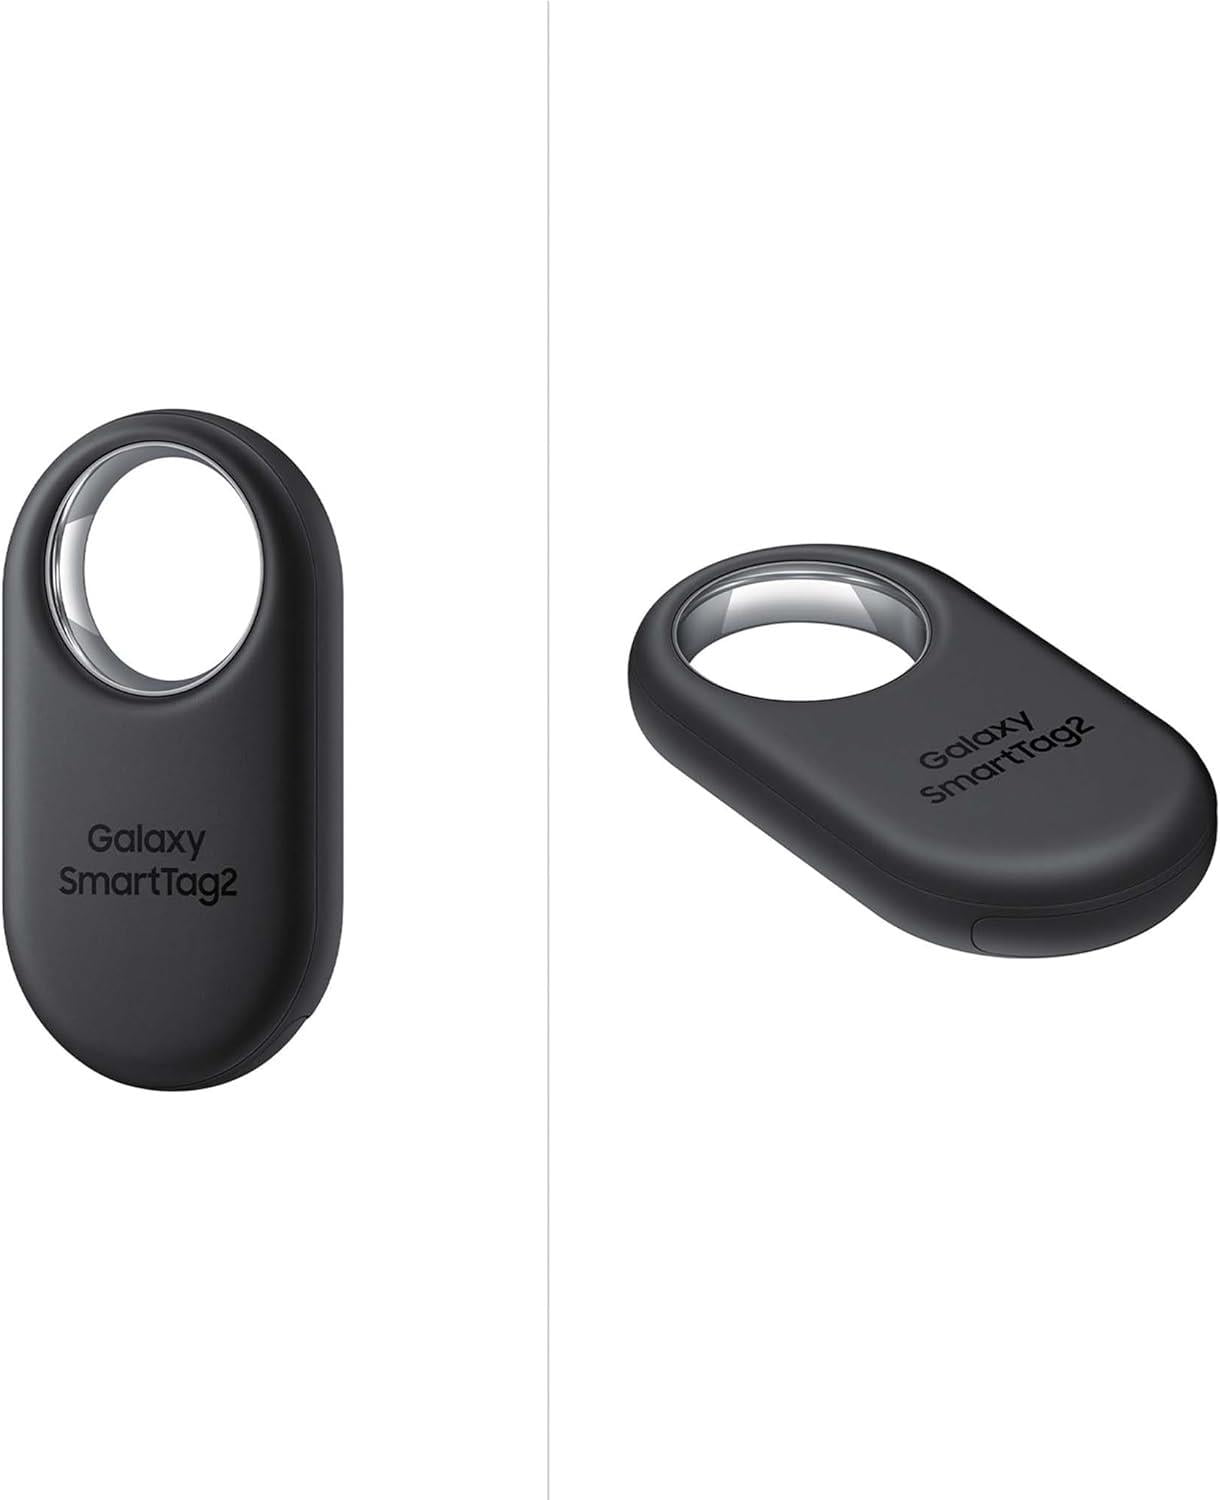 Samsung Galaxy SmartTag2 Bluetooth Tracker (1 Pack) with Compass View AR,  Find Lost Mode - Black 